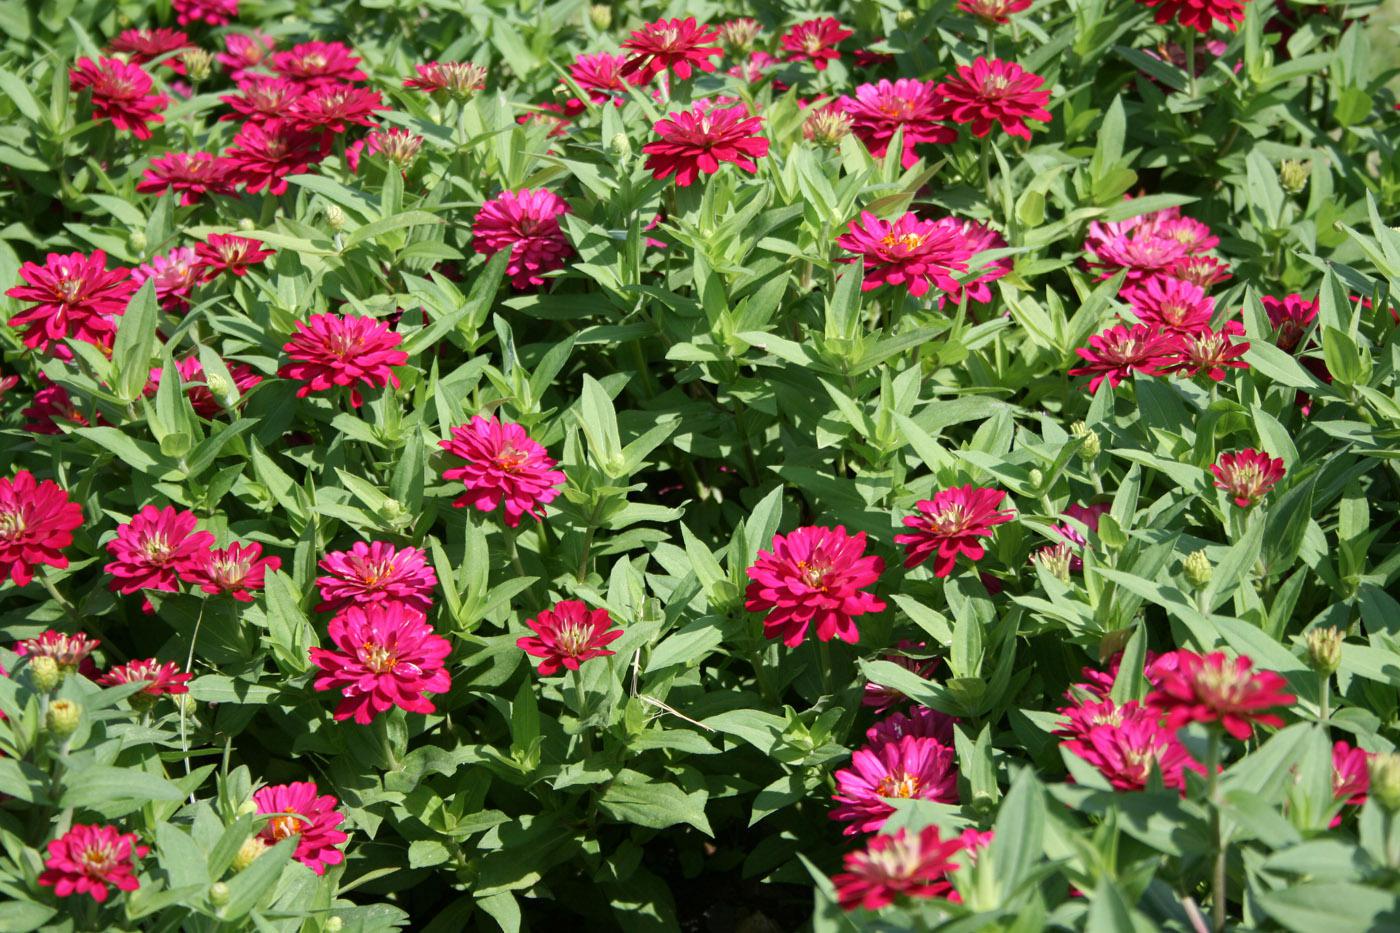 The exciting double-flower Double Cherry Zahara zinnias have deep magenta blooms with a center that lightens as the flowers mature.